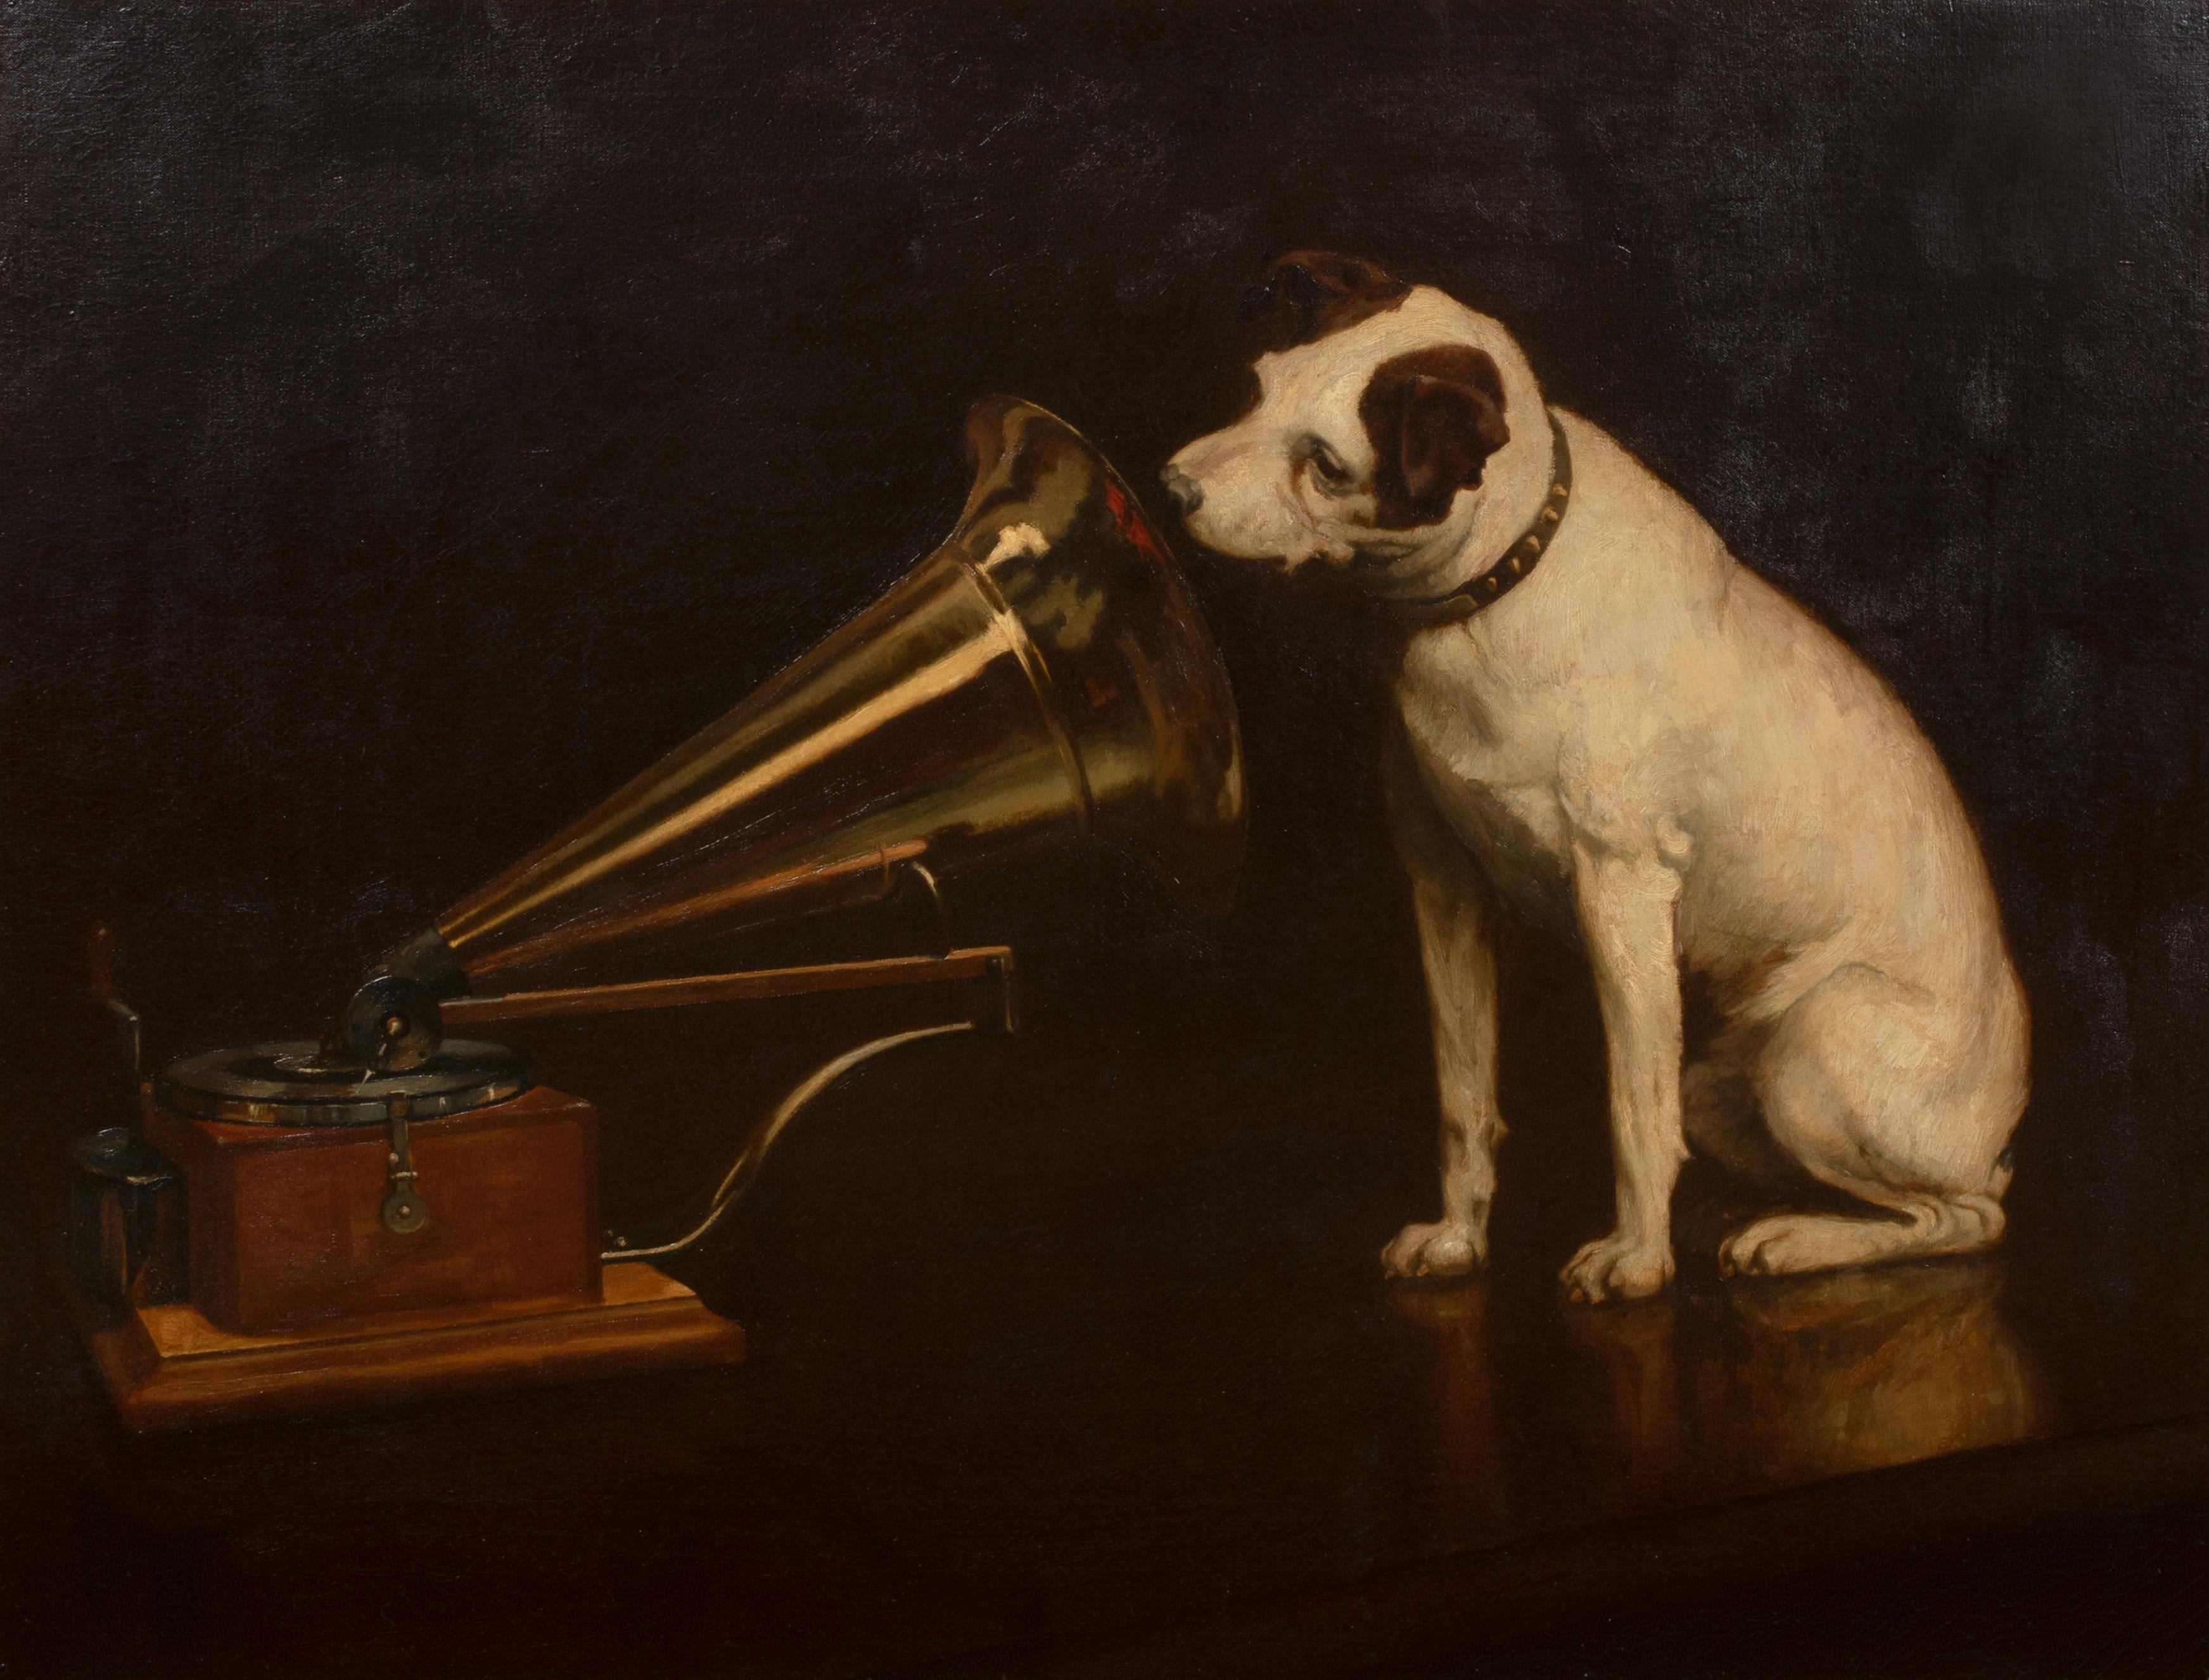 His Masters Voice, 19th Century

attributed to Francis James Barraud (1856-1924)

Large 19th Century English portrait of a Jack Russell terrier and a cylinder phonograph, oil on canvas attributed to Francis James Barraud. Excellent quality and